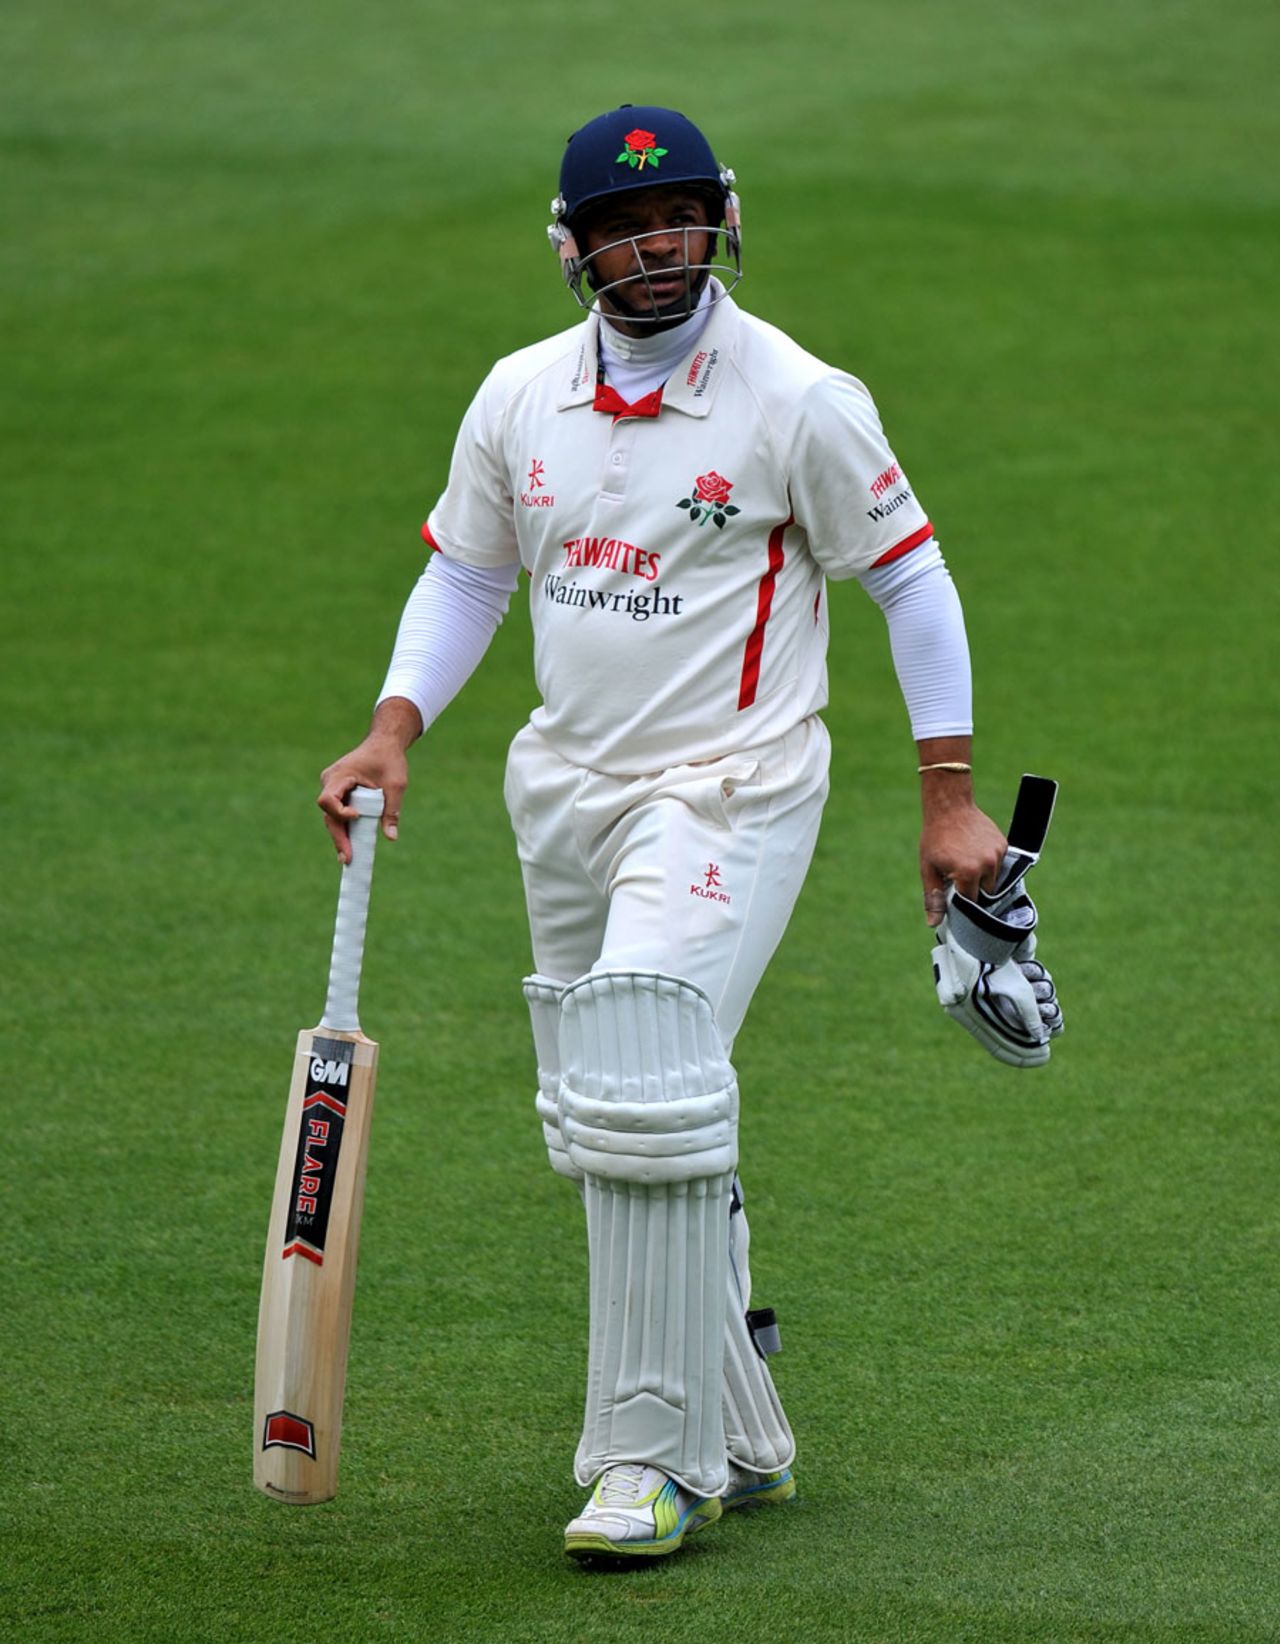 Ashwell Prince made an unbeaten 87 but Lancashire couldn't avert the follow-on, Warwickshire v Lancashire, County Championship, Division One, 3rd day, Edgbaston, May 18, 2012